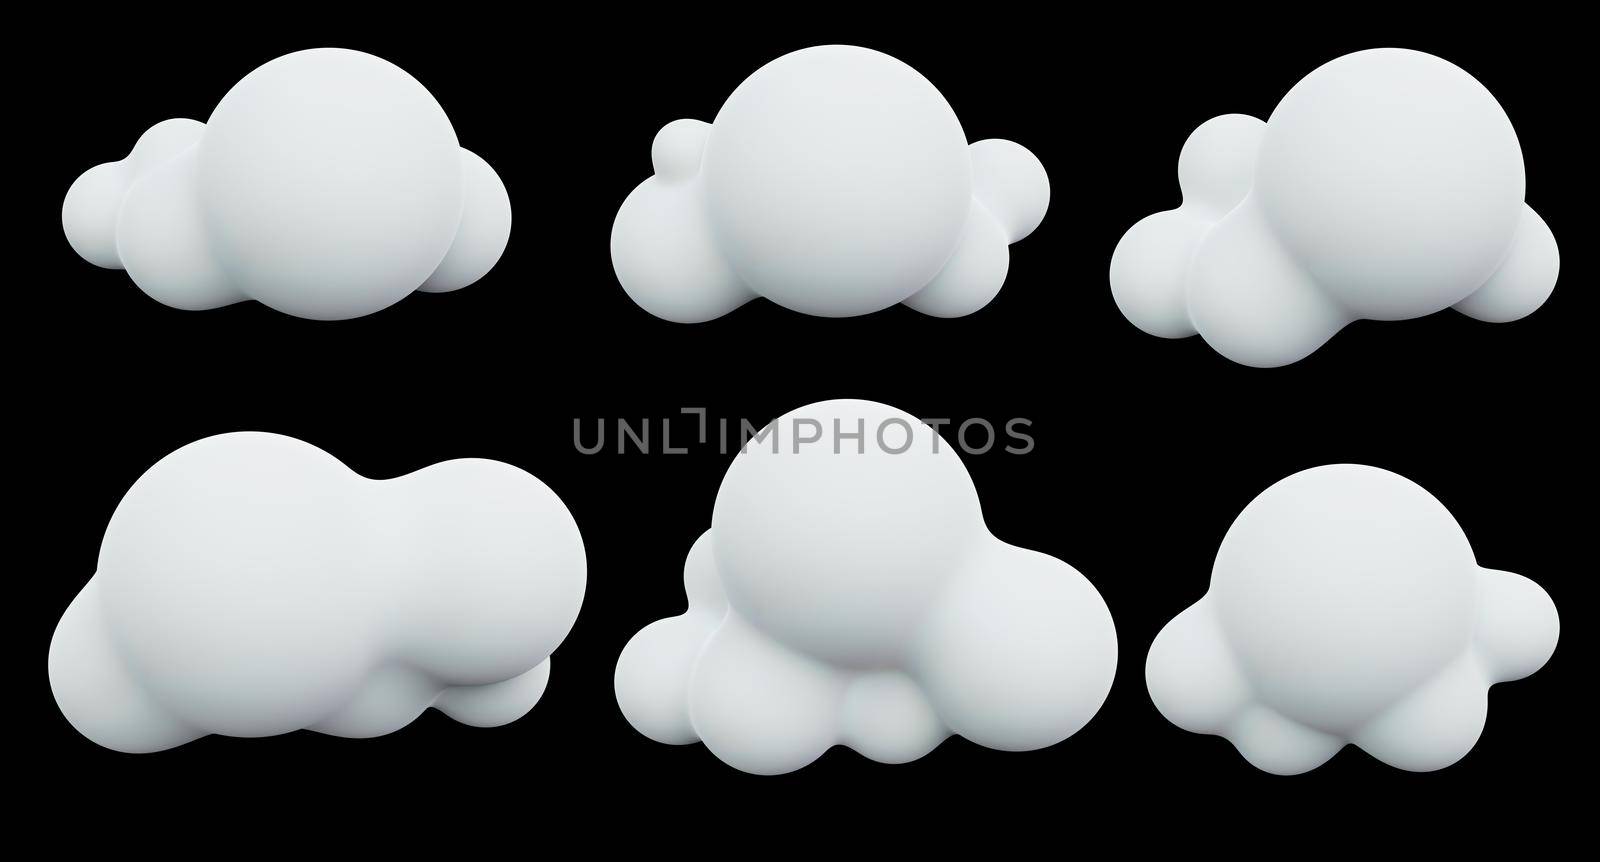 Cloud icons set on isolated black background. Nature and object concept. 3D illustration rendering